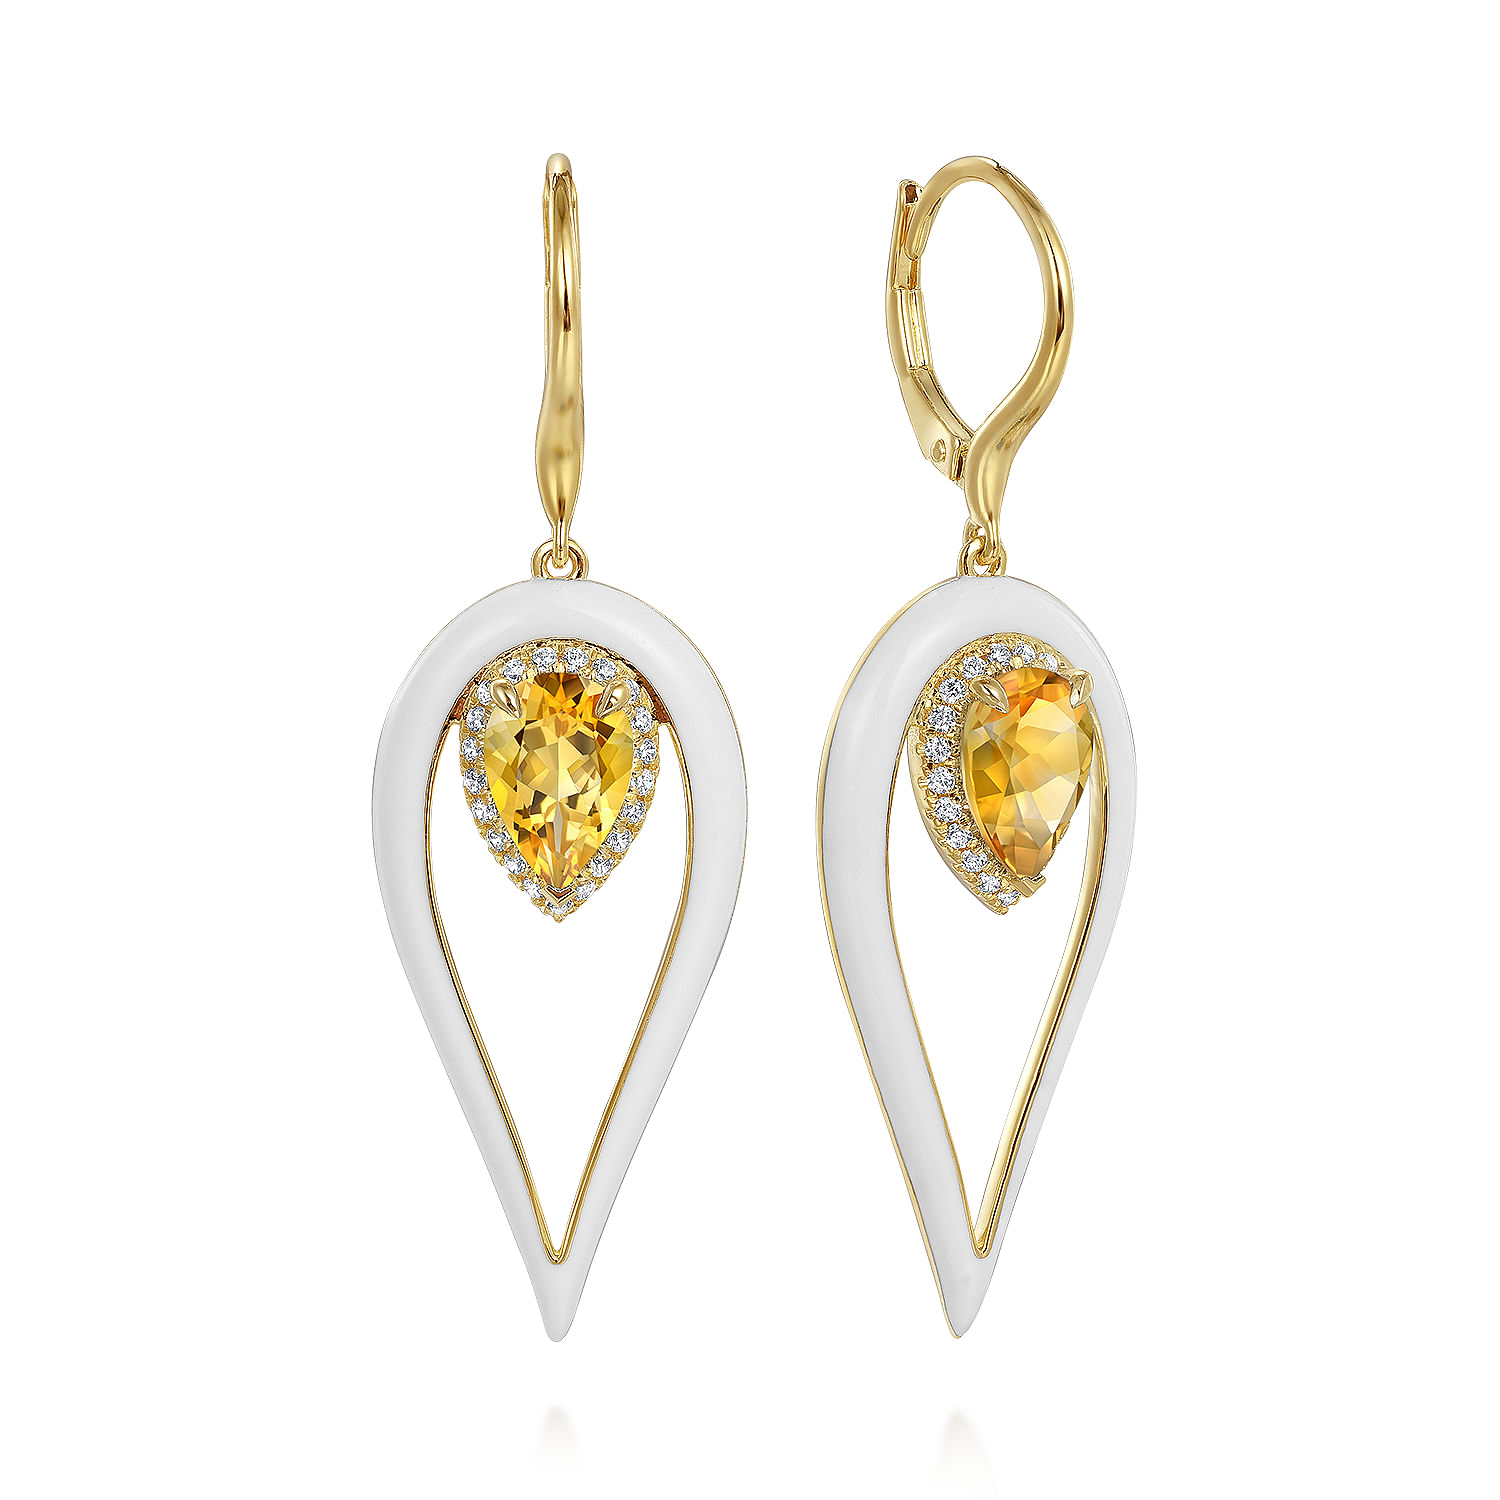 14K Yellow Gold Diamond and Citrine Long Pear Drop Earrings With White Enamel